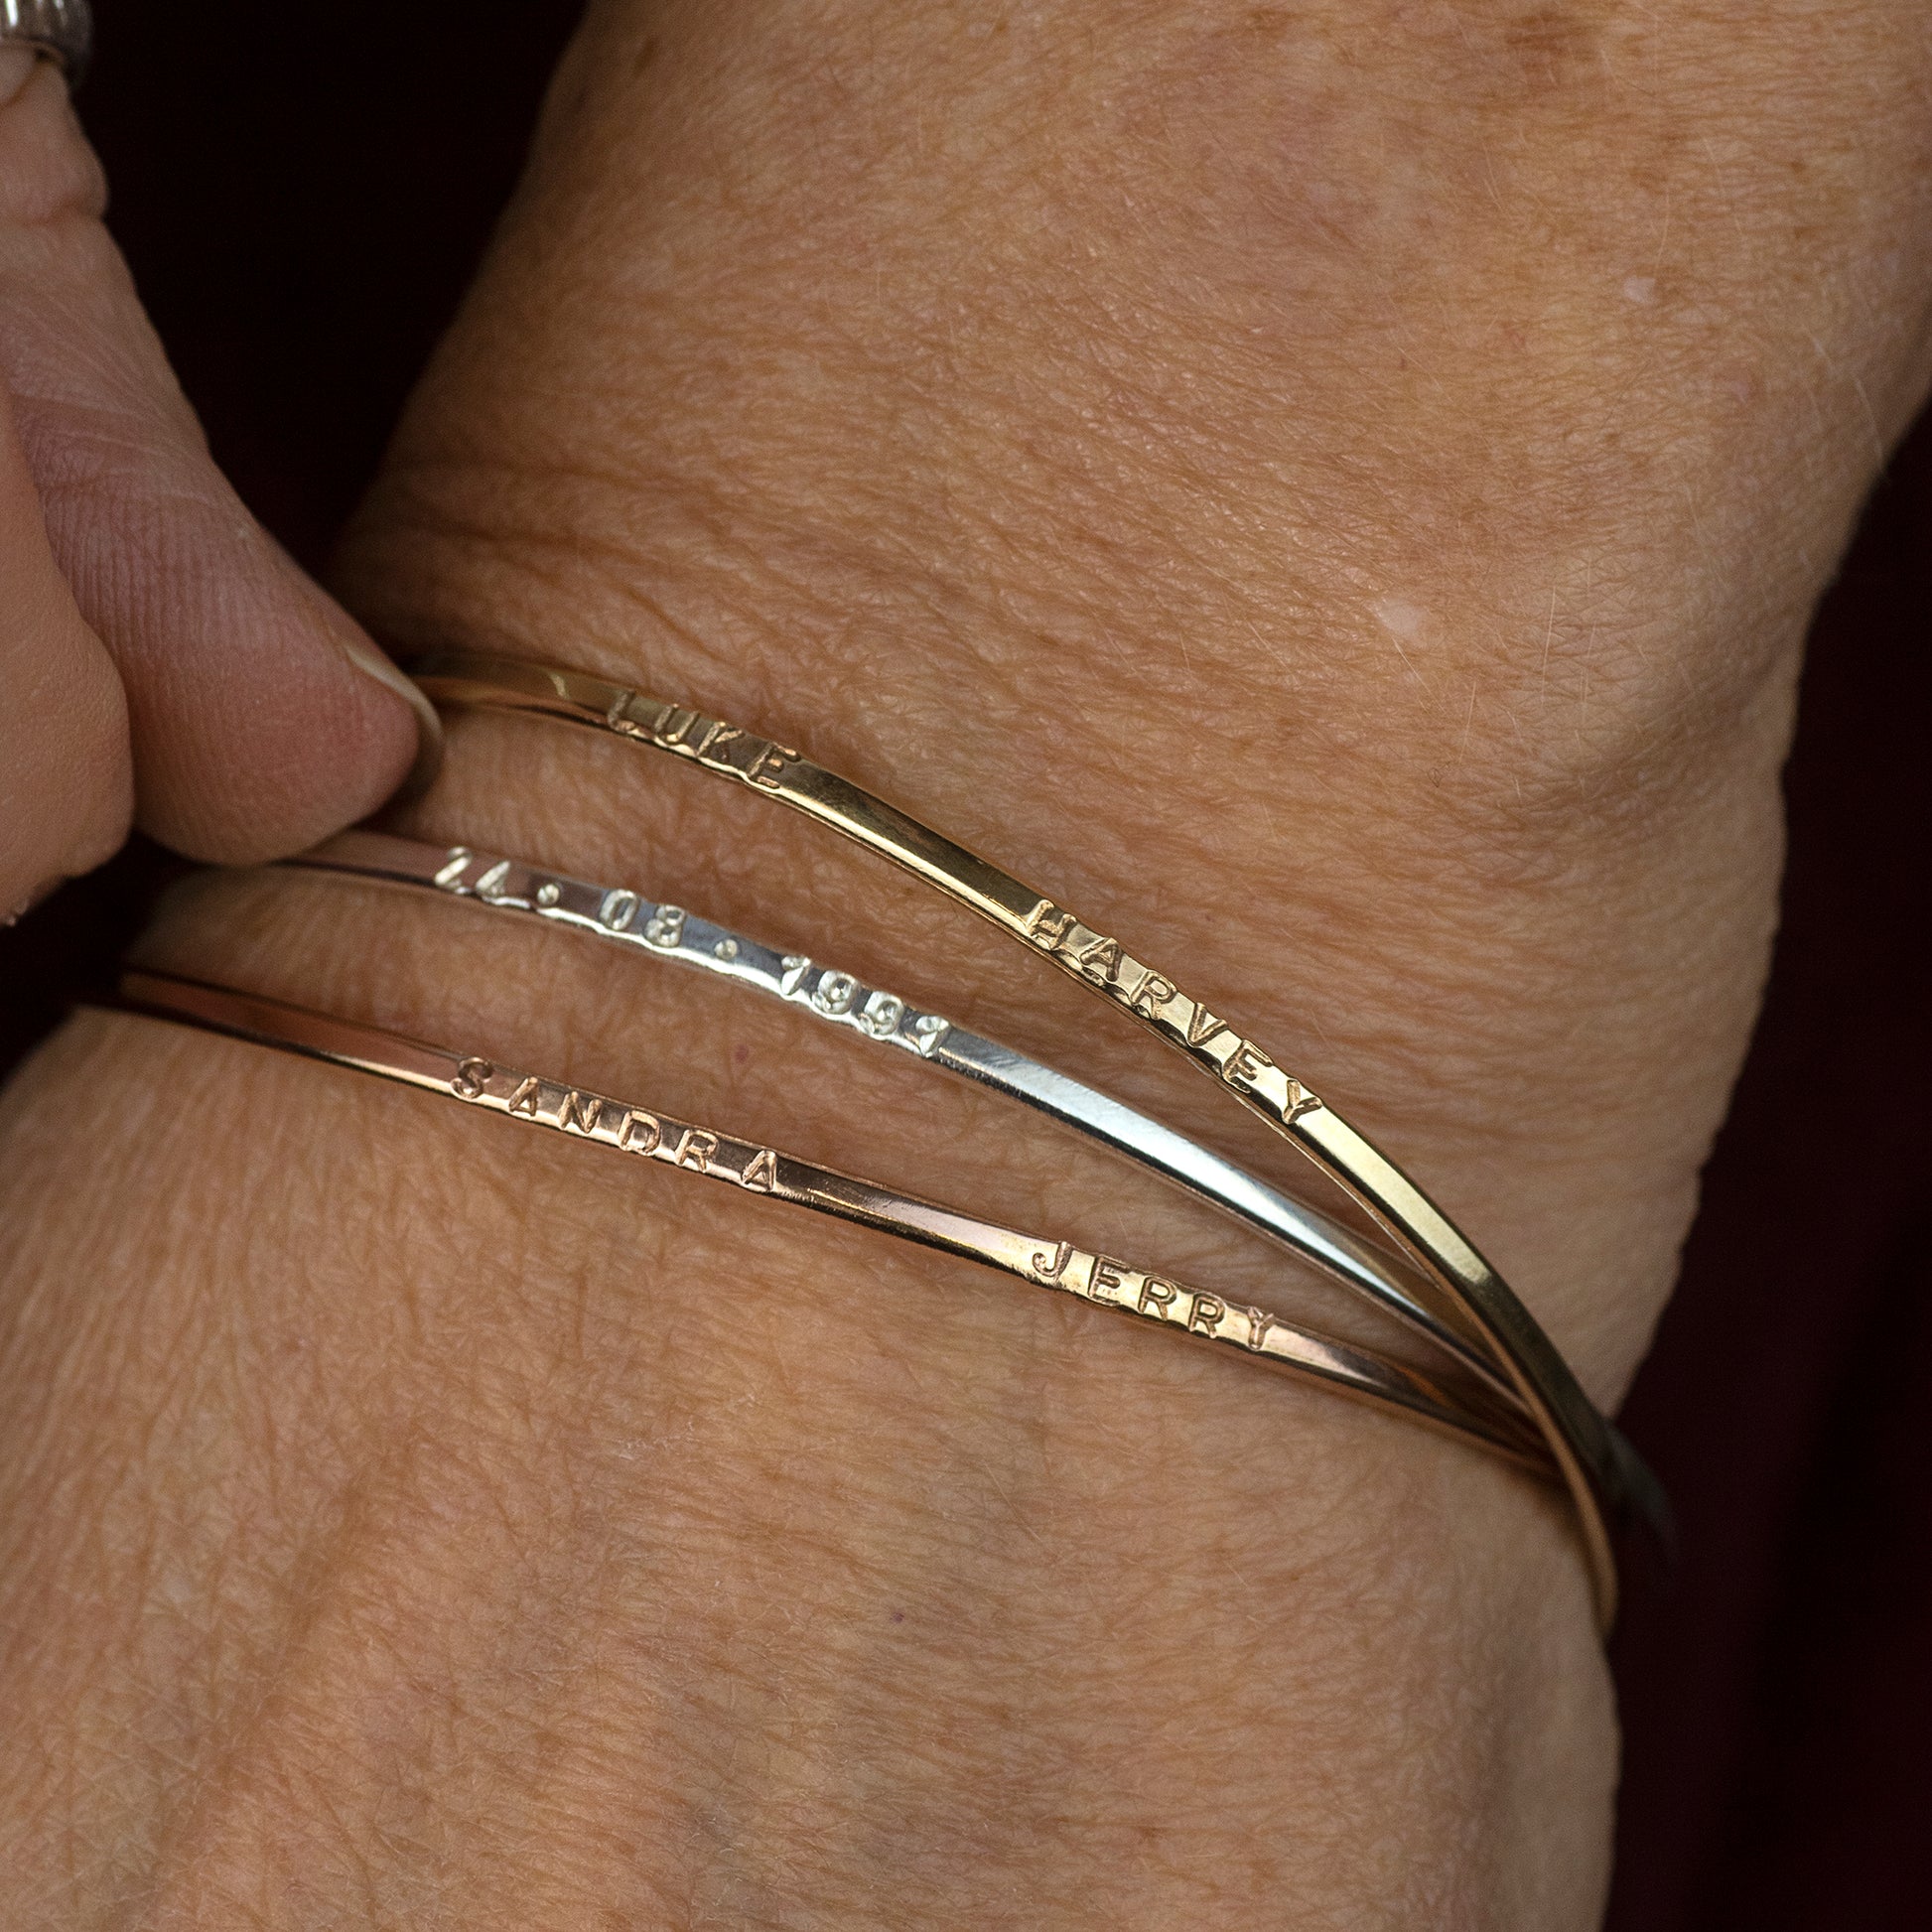 9kt Personalised 30th Anniversary Bangle - Triple Linked Bangle - 3 Links for 3 Decades